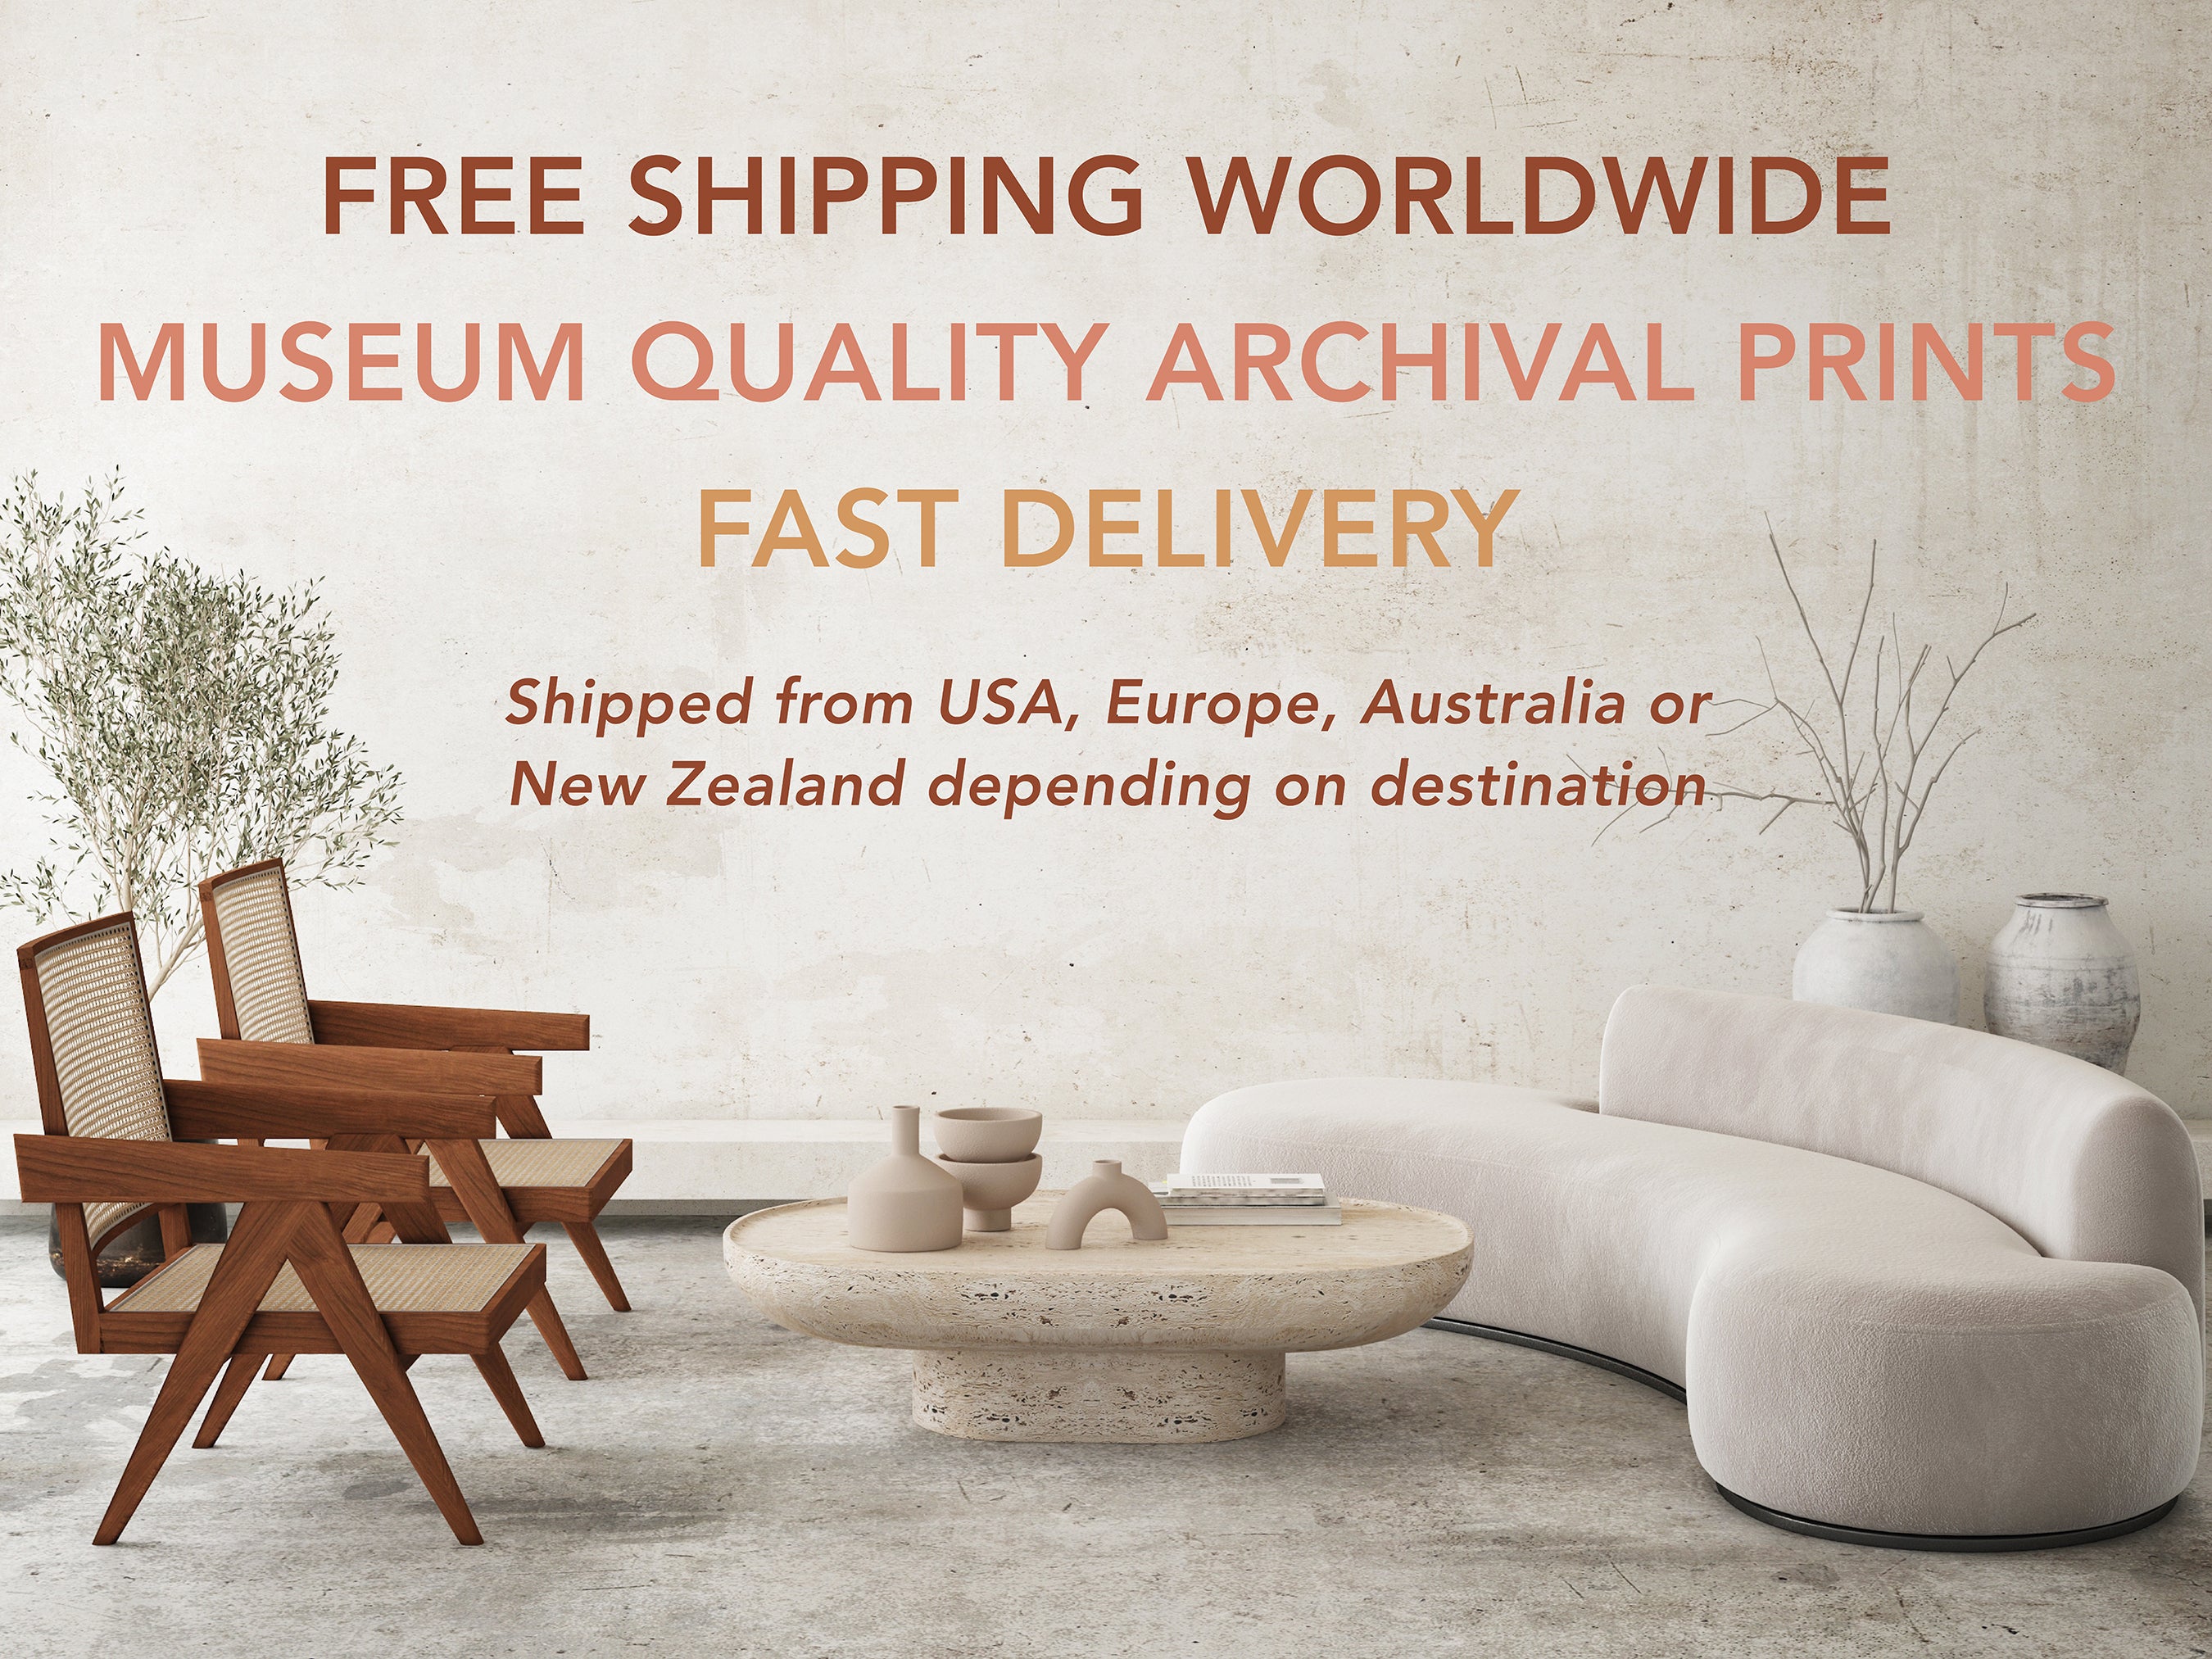 NEW ZEALAND ART PRINTS FREE SHIPPING FAST DELIVERY ARCHIVAL GICLEE MUSEUM QUALITY